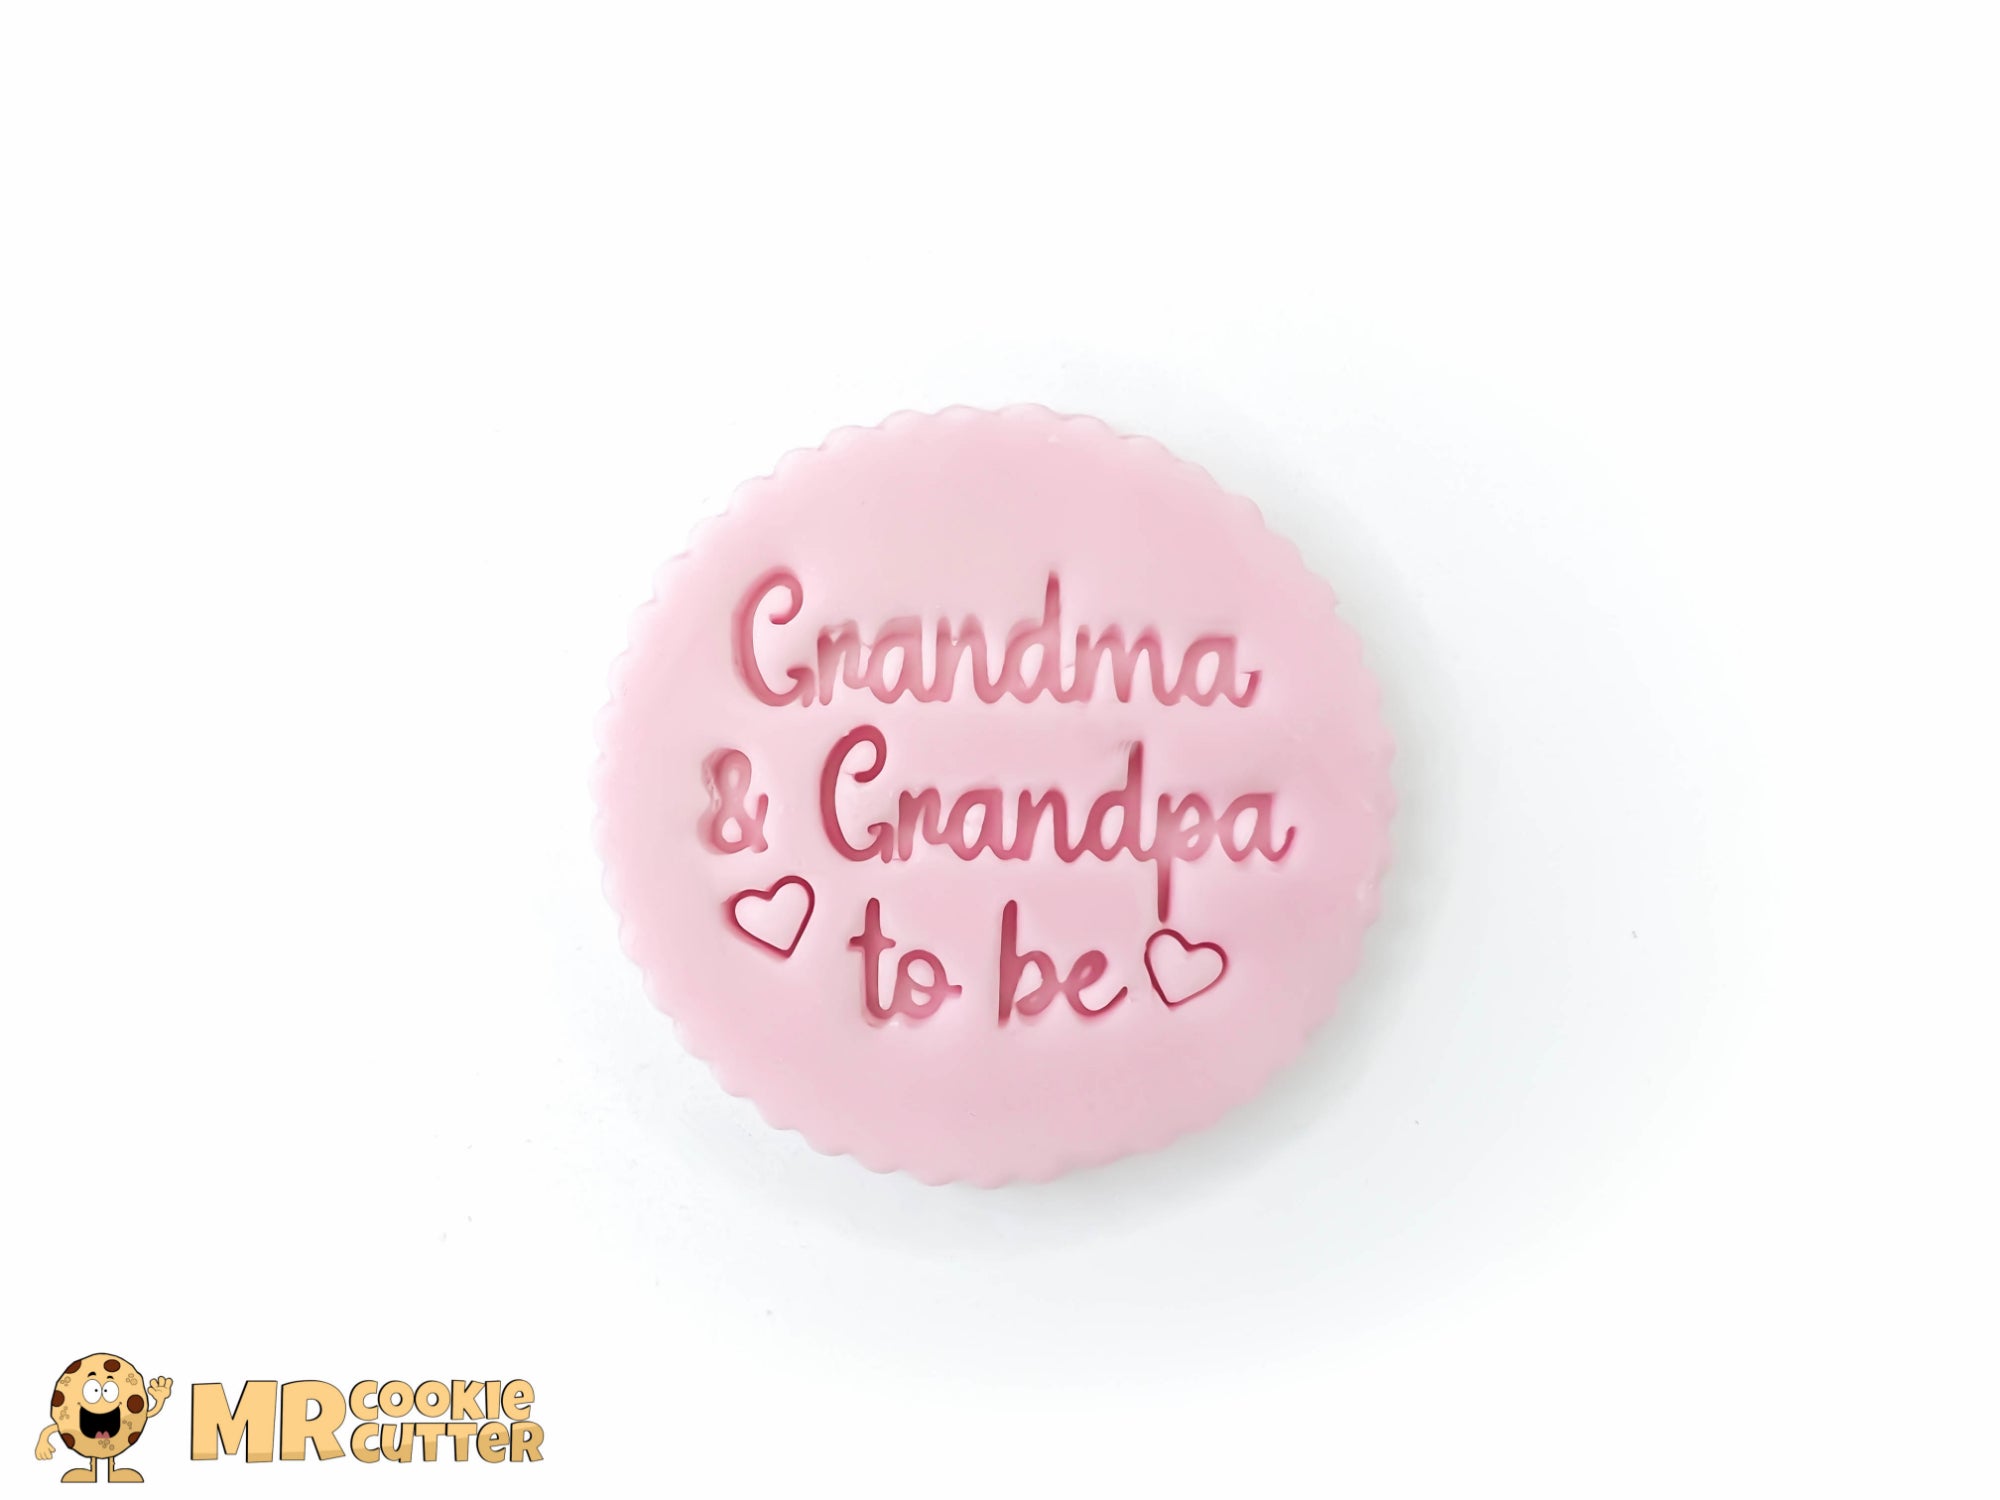 Grandma and Grandpa to be Cupcake Topper with hearts